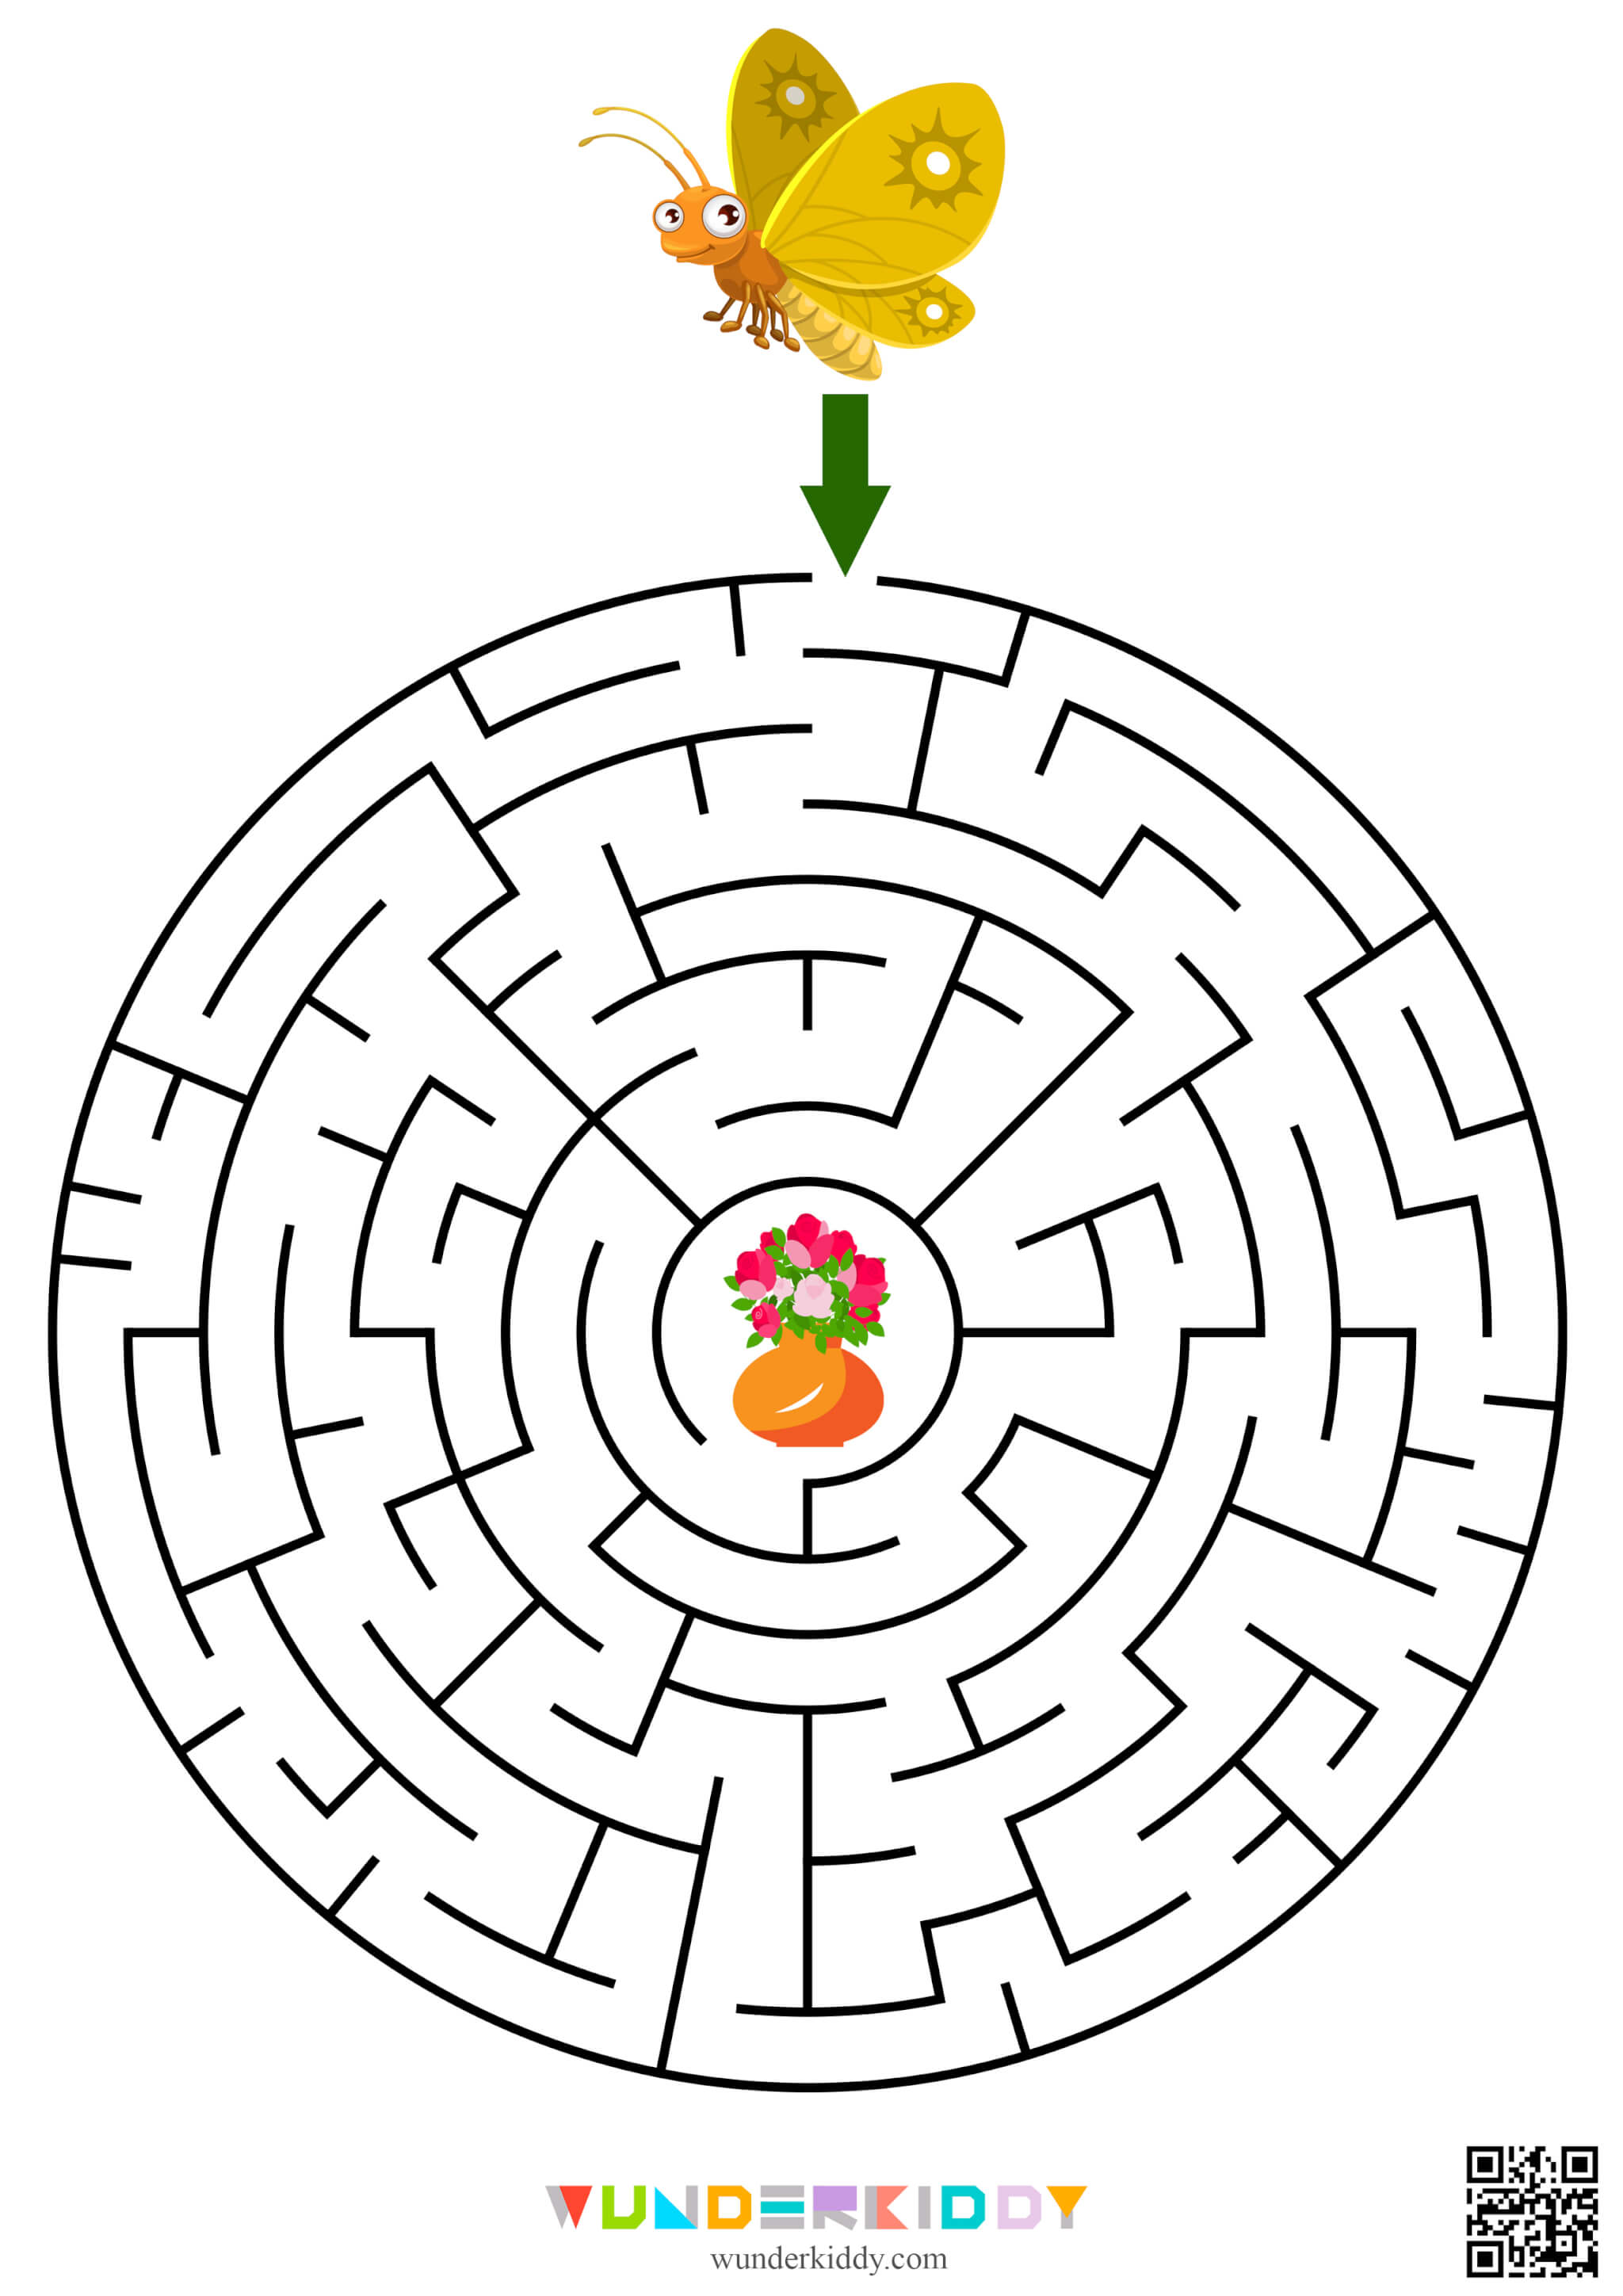 Printable Maze for Kids Help to Find the Way - Image 10